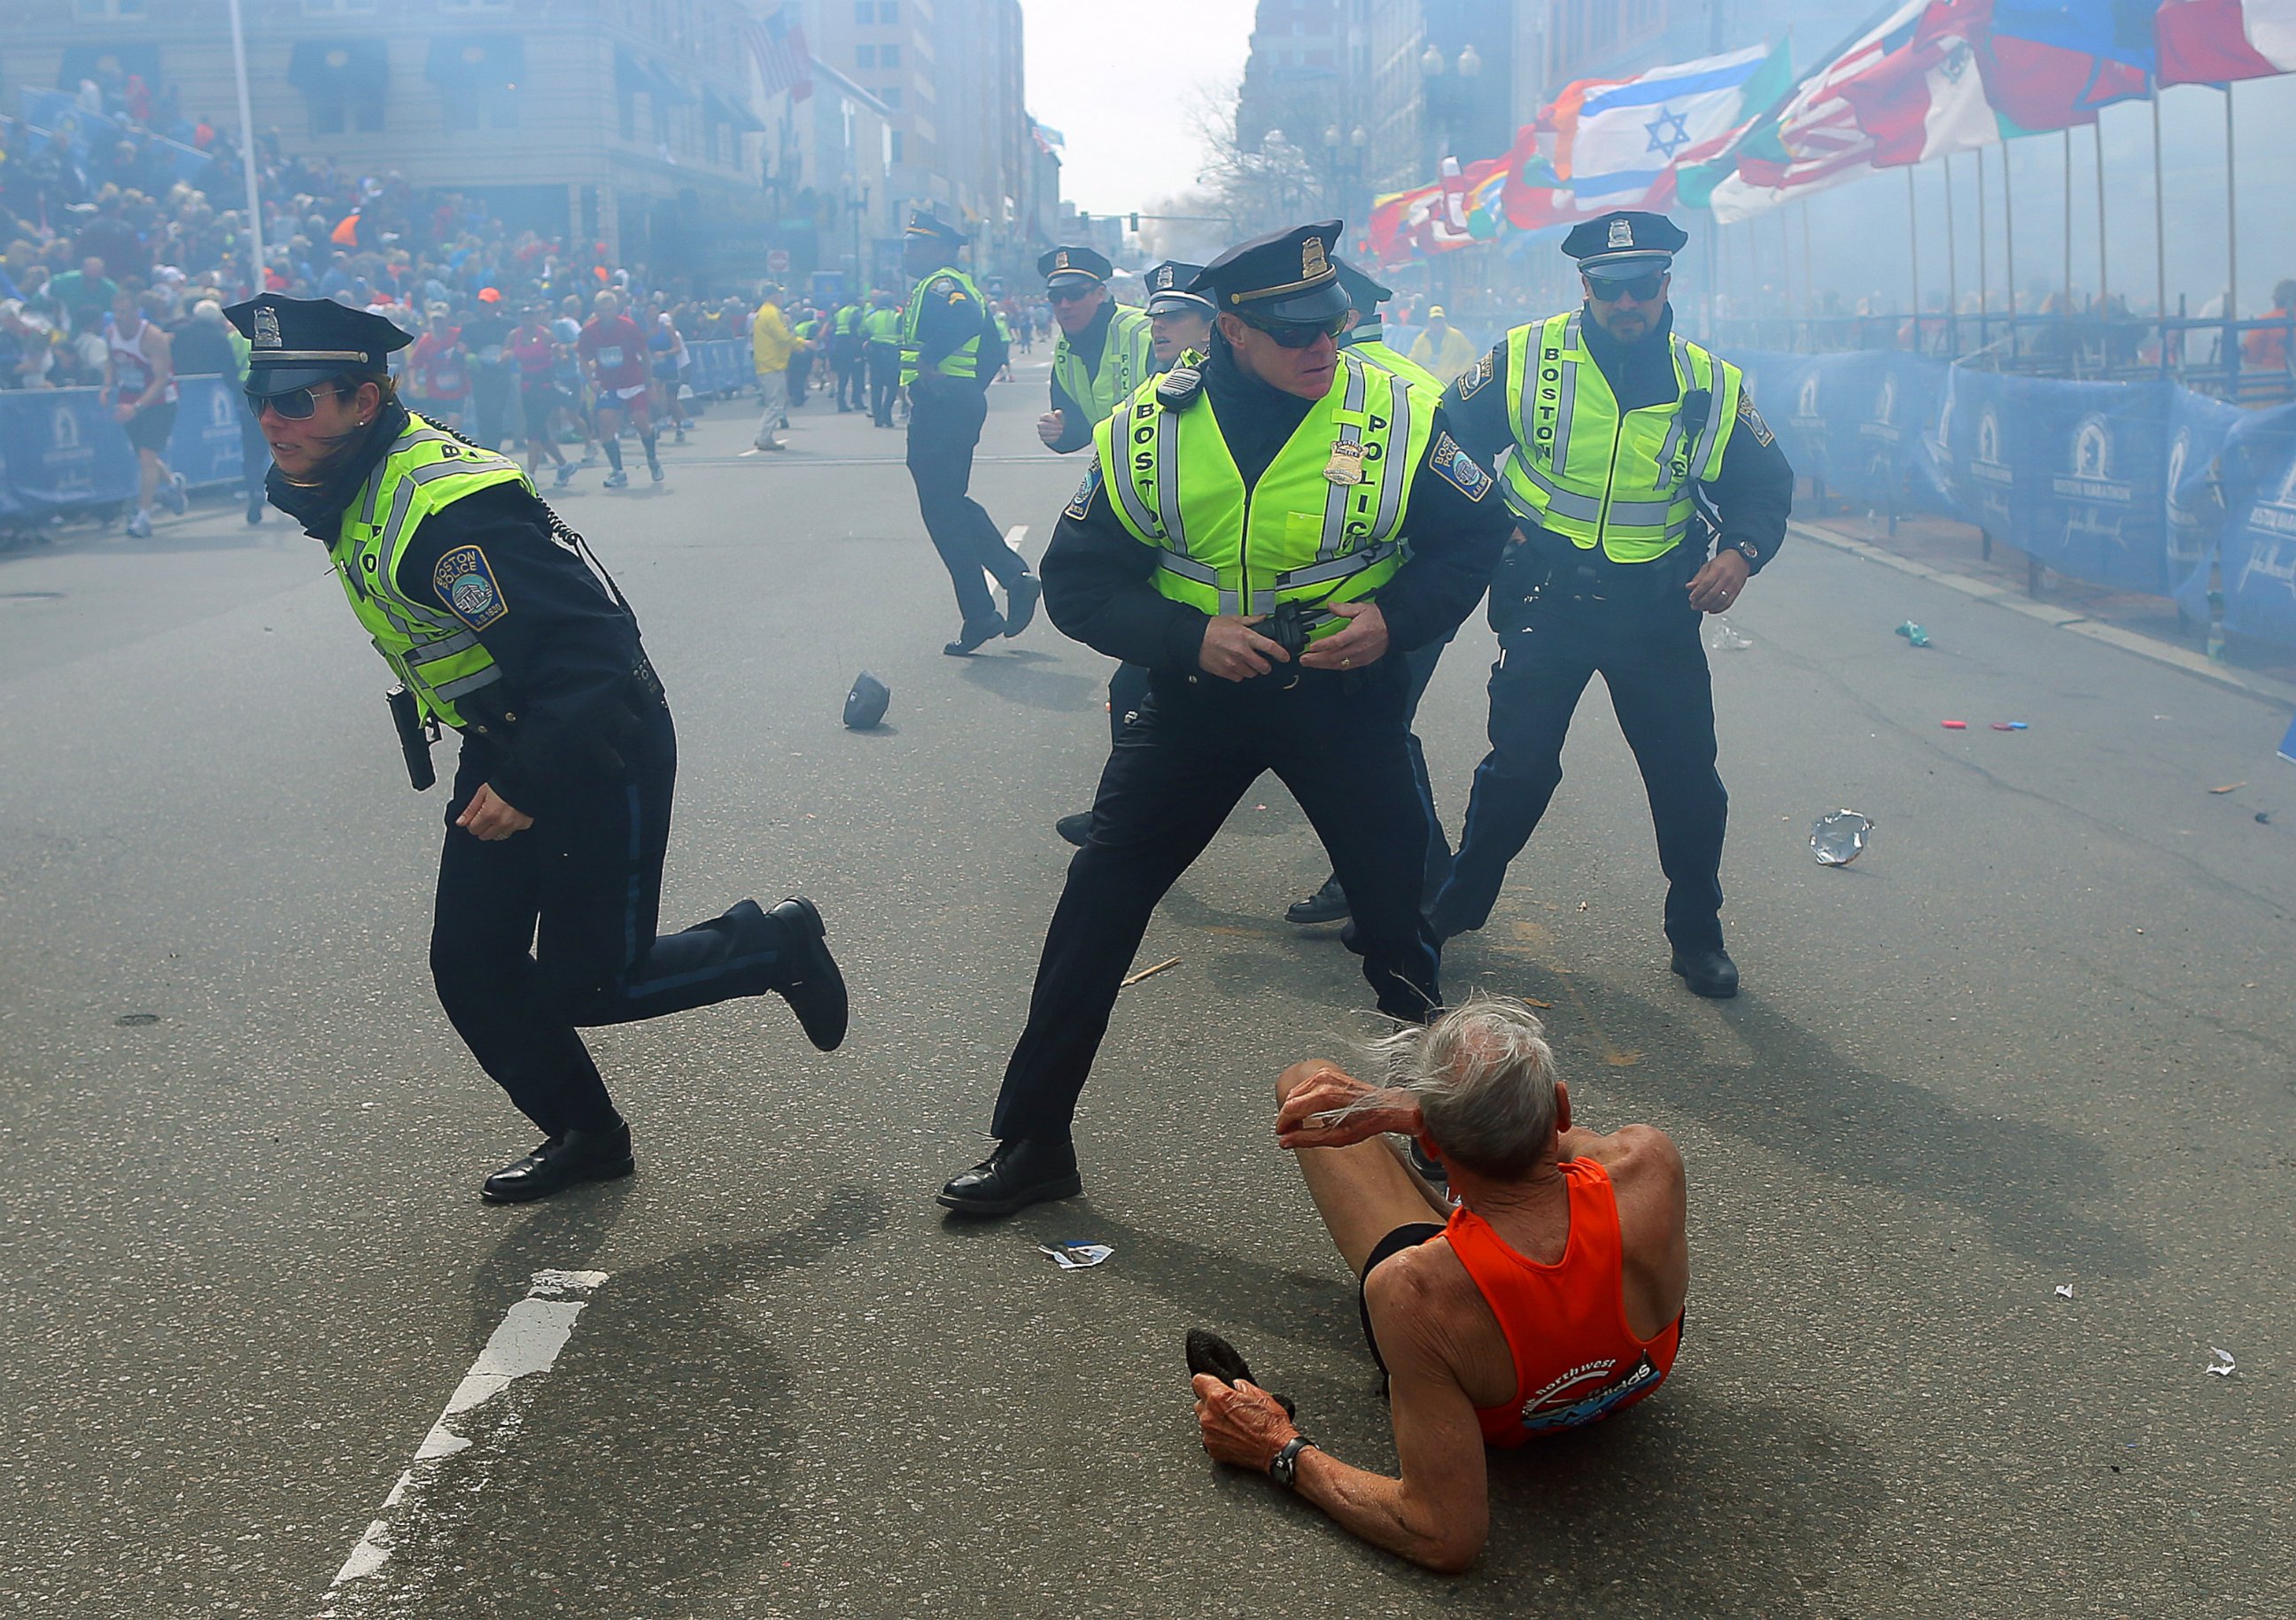 PHOTO: A runner is on the ground as police officers draw their guns after the second explosion near the finish line of the 117th Boston Marathon, April 15, 2013.